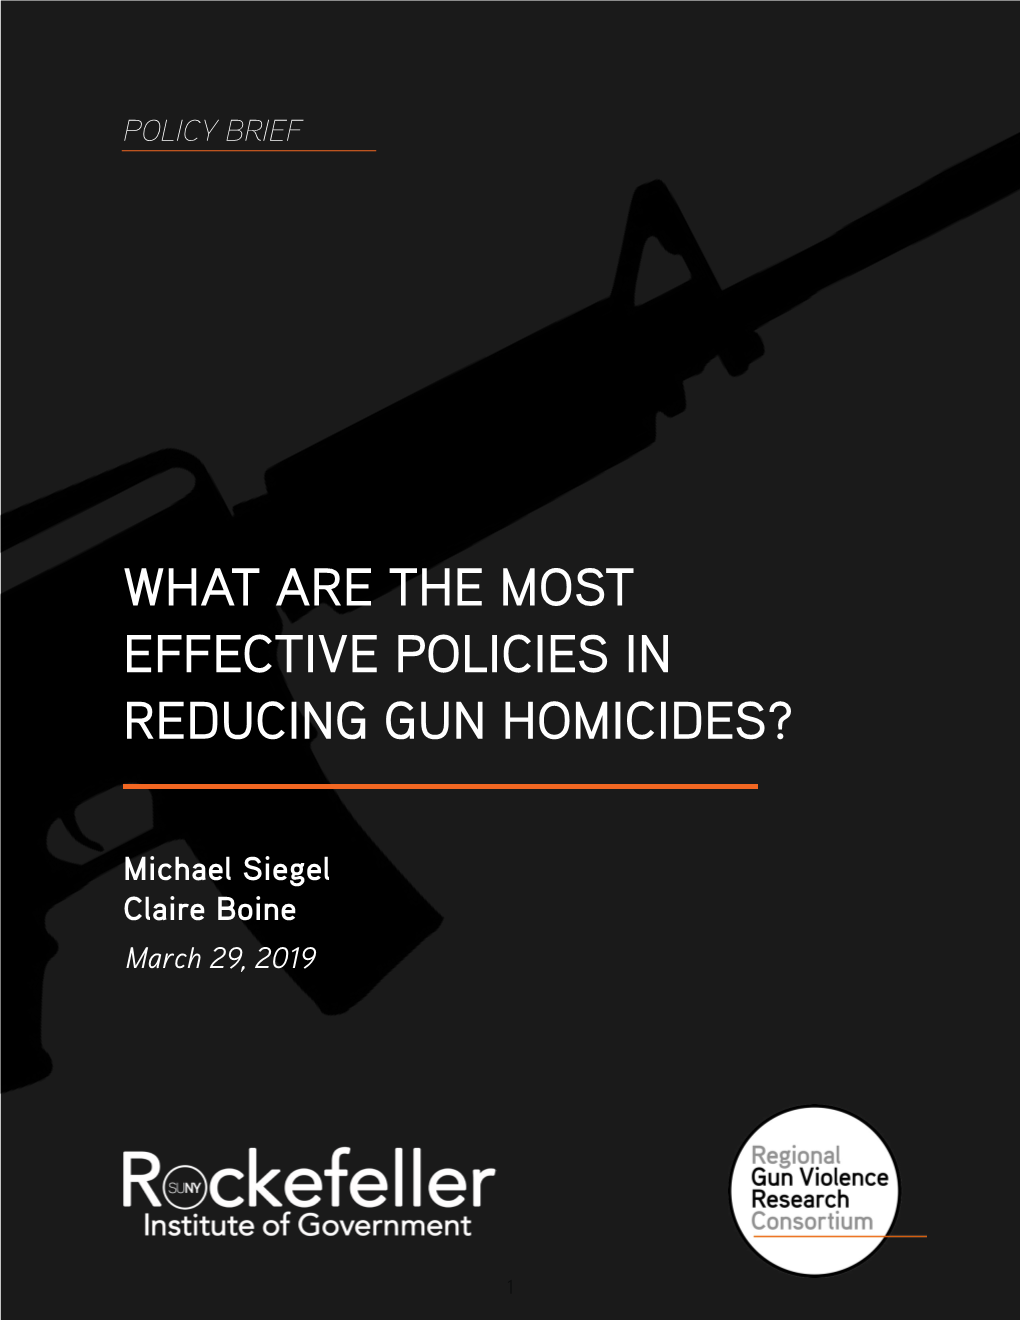 What Are the Most Effective Policies in Reducing Gun Homicides?